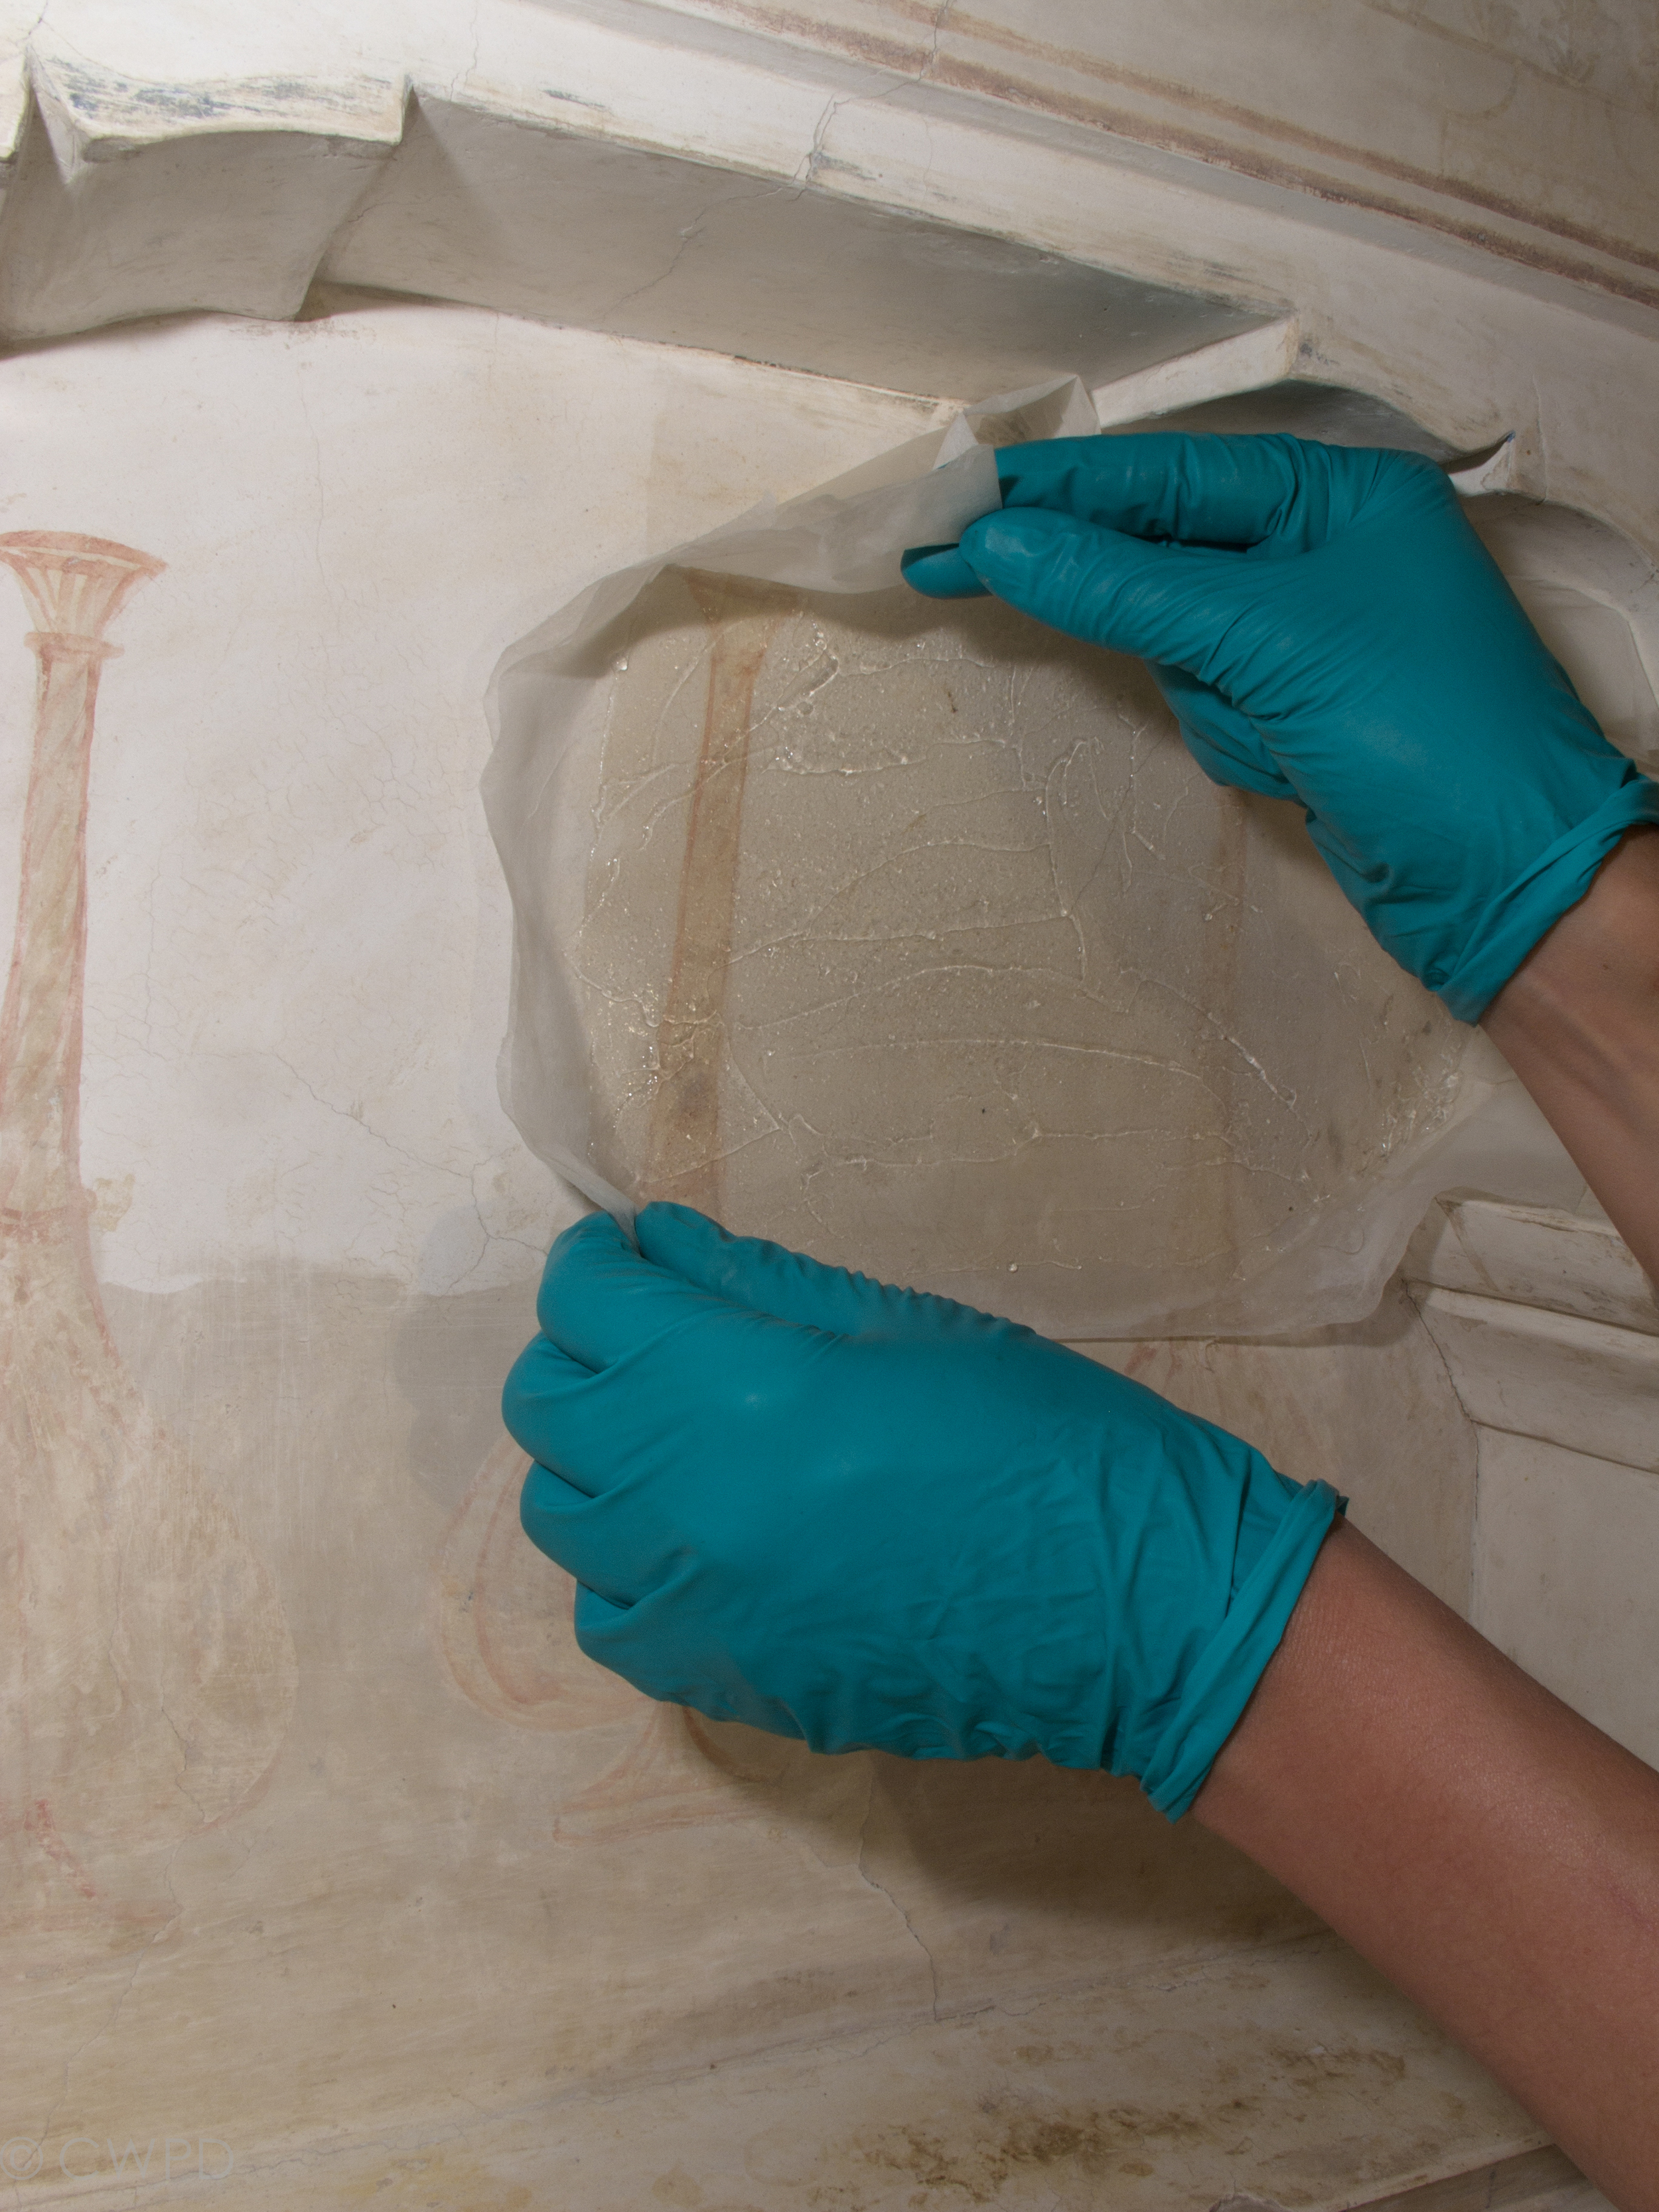  The tissue was then peeled off, removing the gel poultice with it.&nbsp;  Image © Courtauld CWPD 